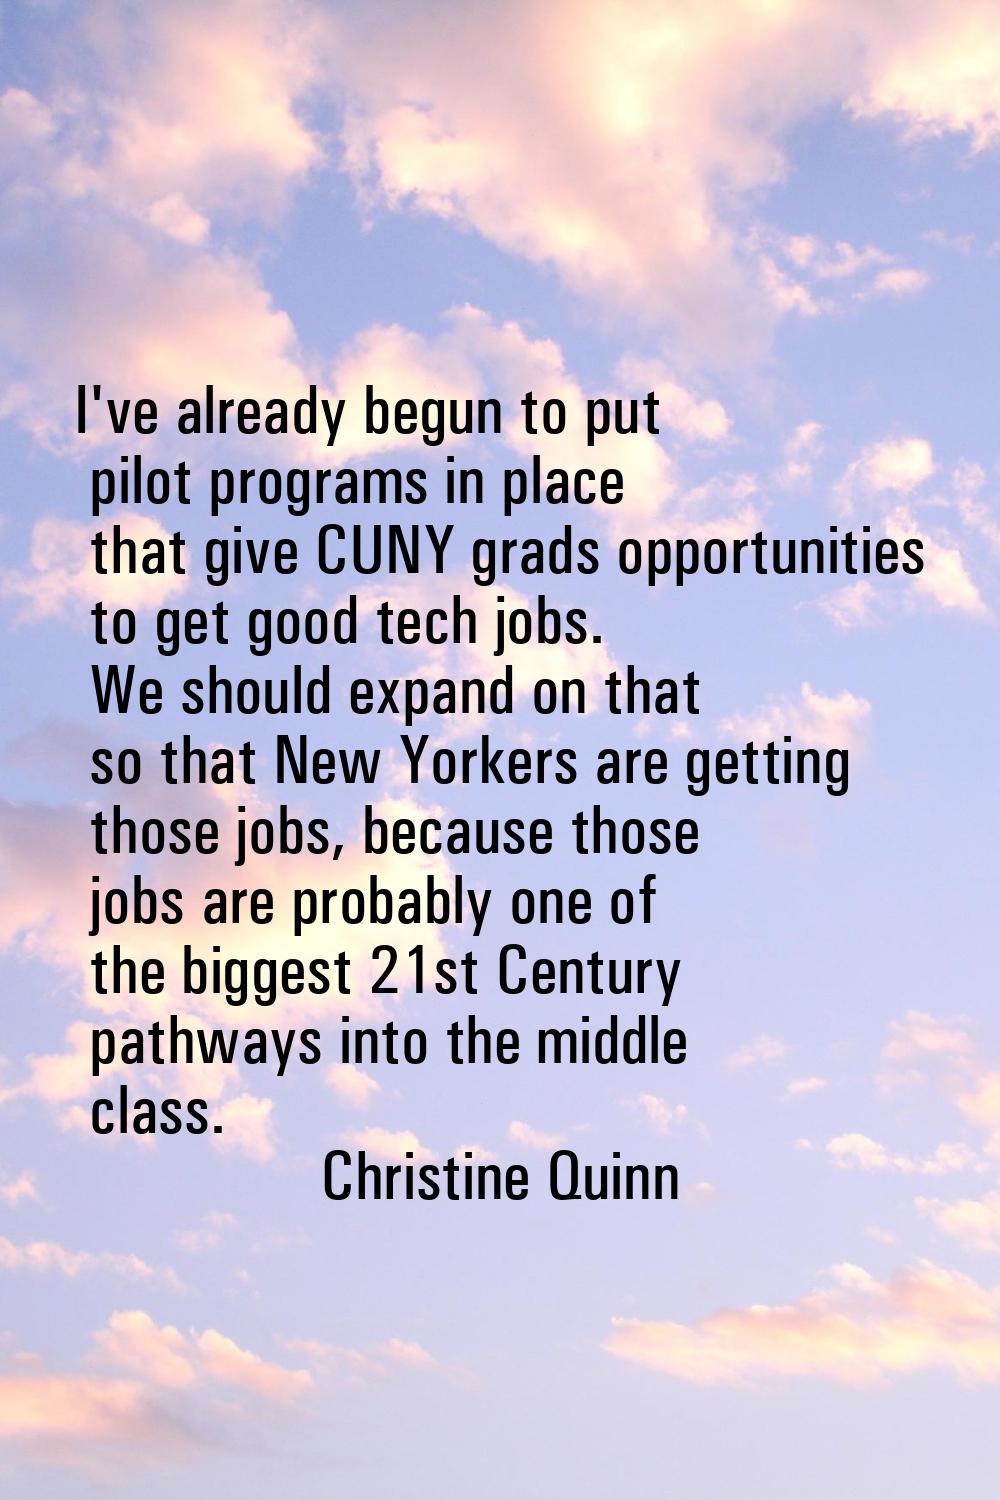 I've already begun to put pilot programs in place that give CUNY grads opportunities to get good te